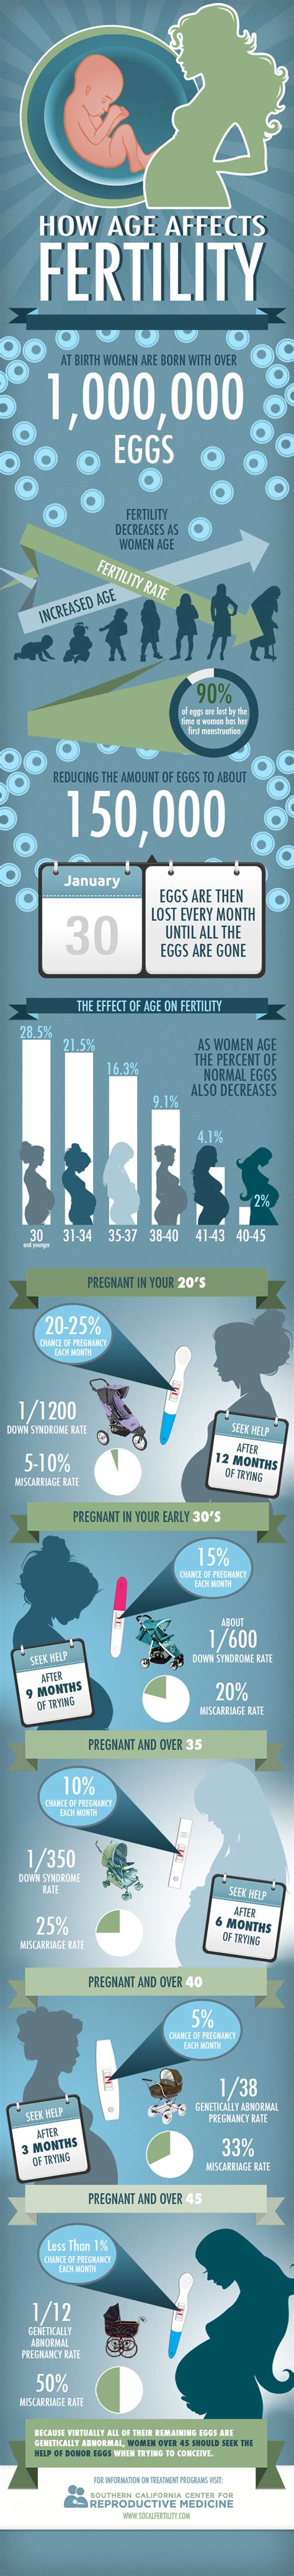 Age And Fertility Infographic Southern California Fertility